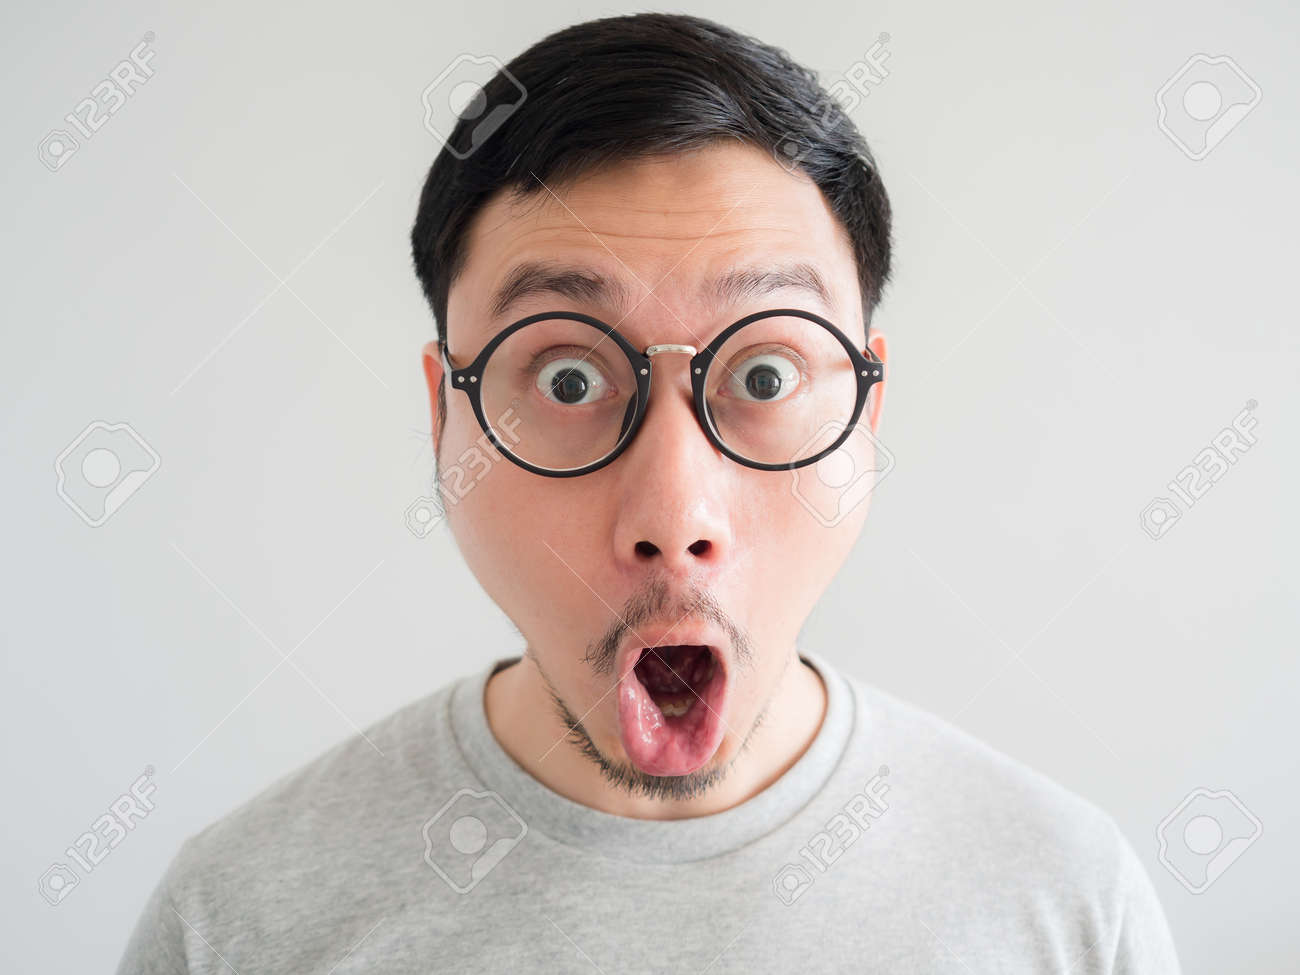 101181979-amazing-and-shocked-face-of-asian-man-with-eyeglasses-.jpg